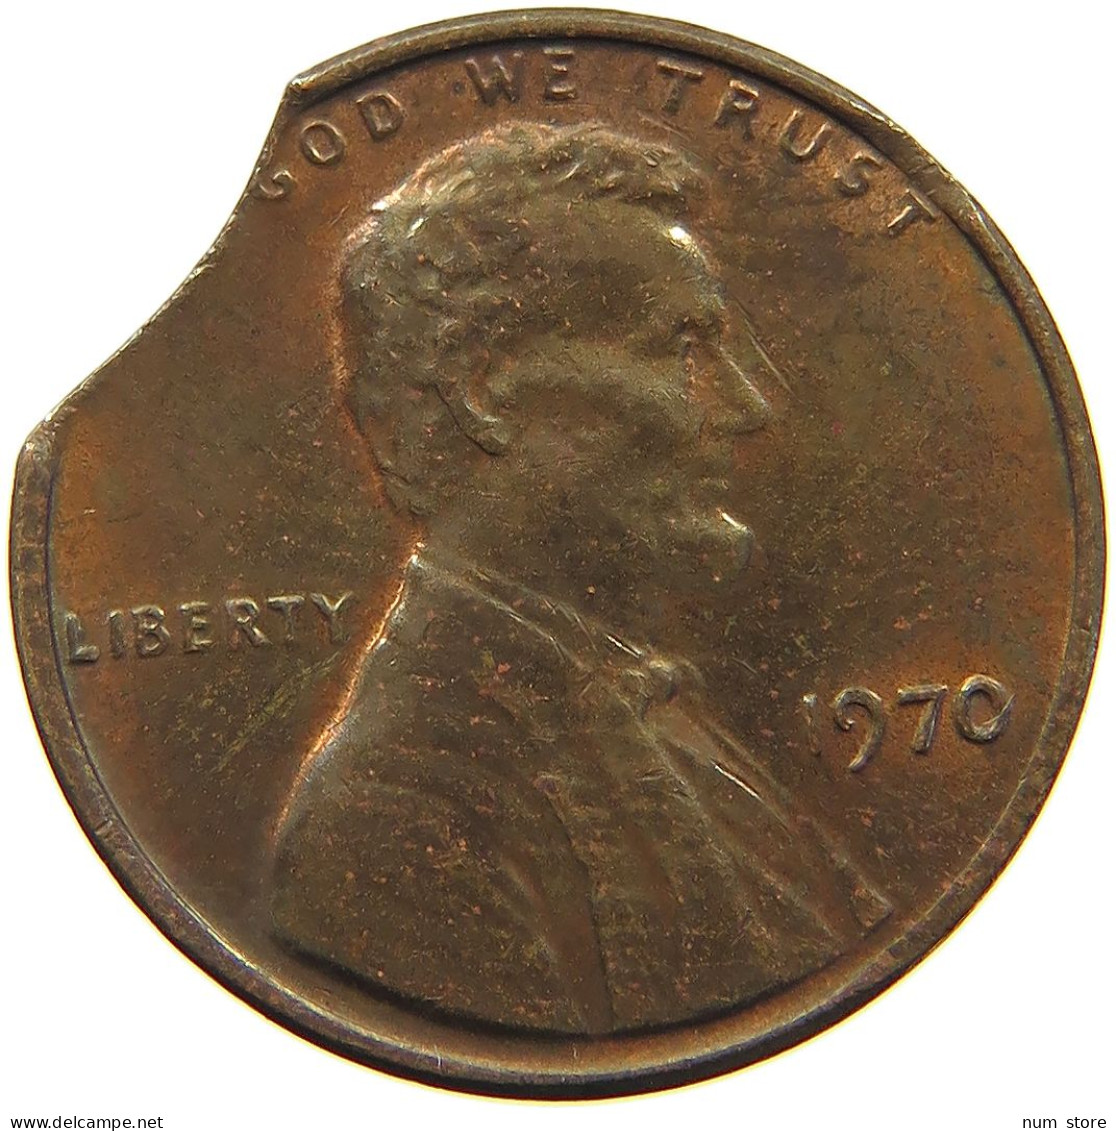 UNITED STATES OF AMERICA CENT 1970 Lincoln Memorial MINTING ERROR #t161 0393 - 1959-…: Lincoln, Memorial Reverse